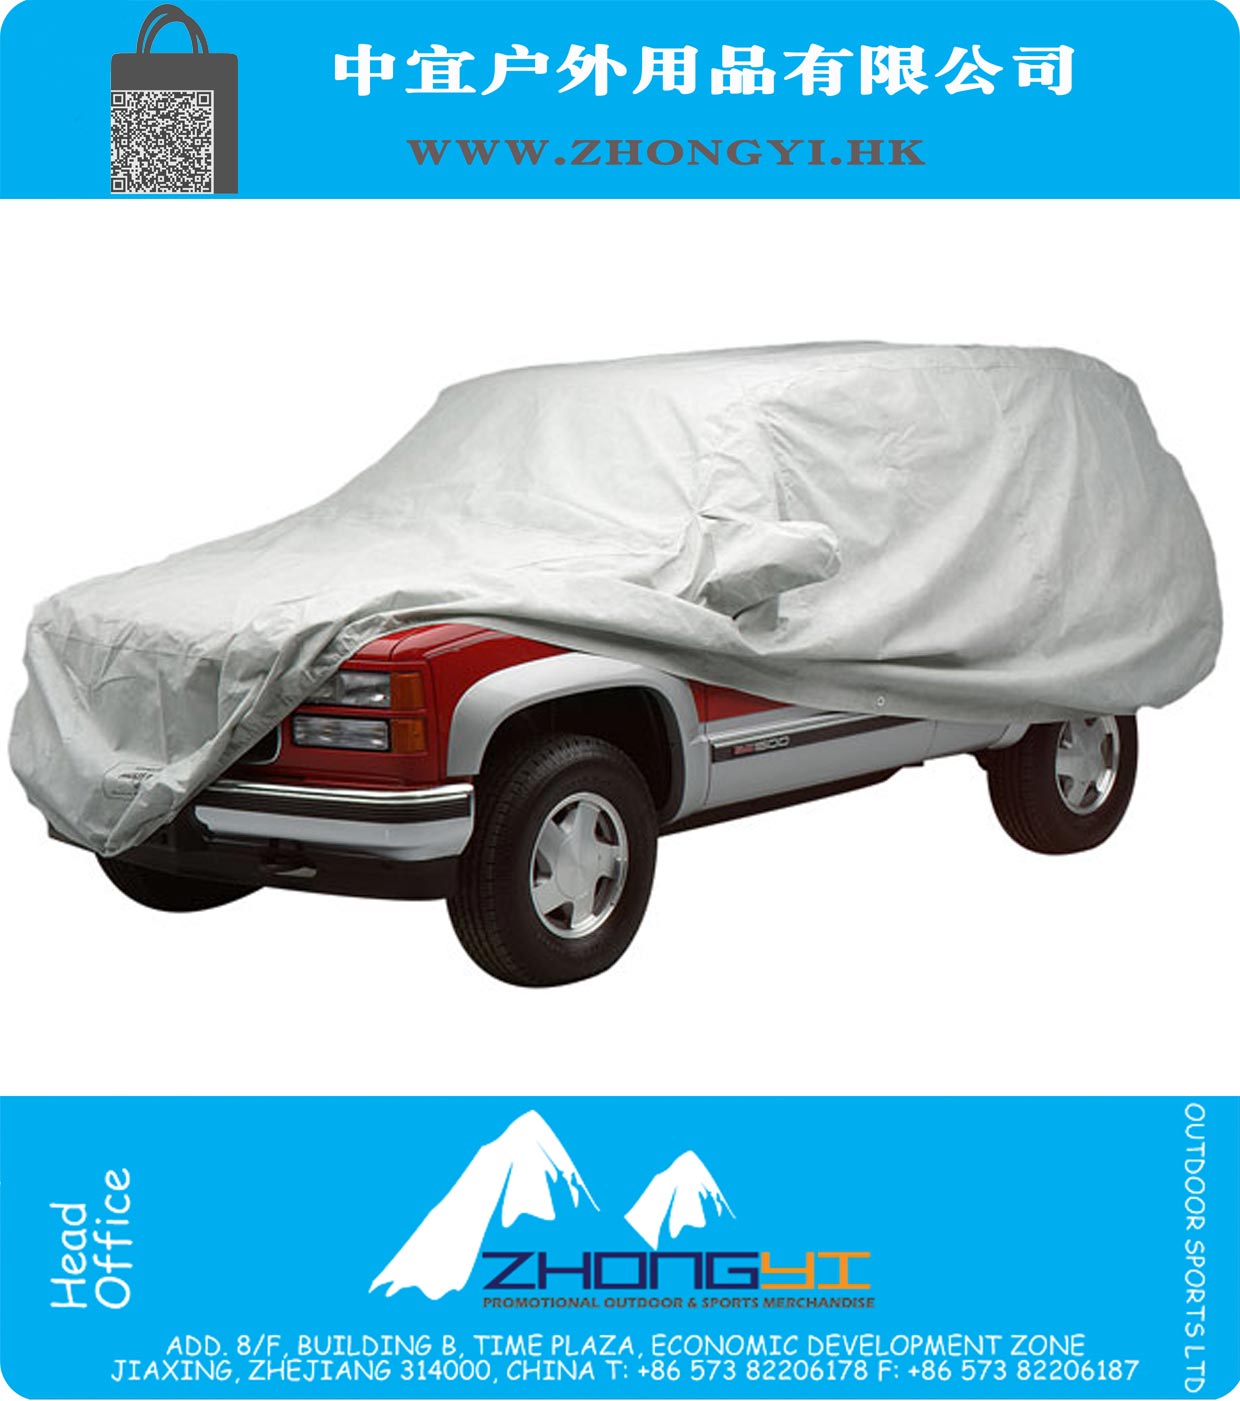 Ready-Fit Block-It 200 Car Covers